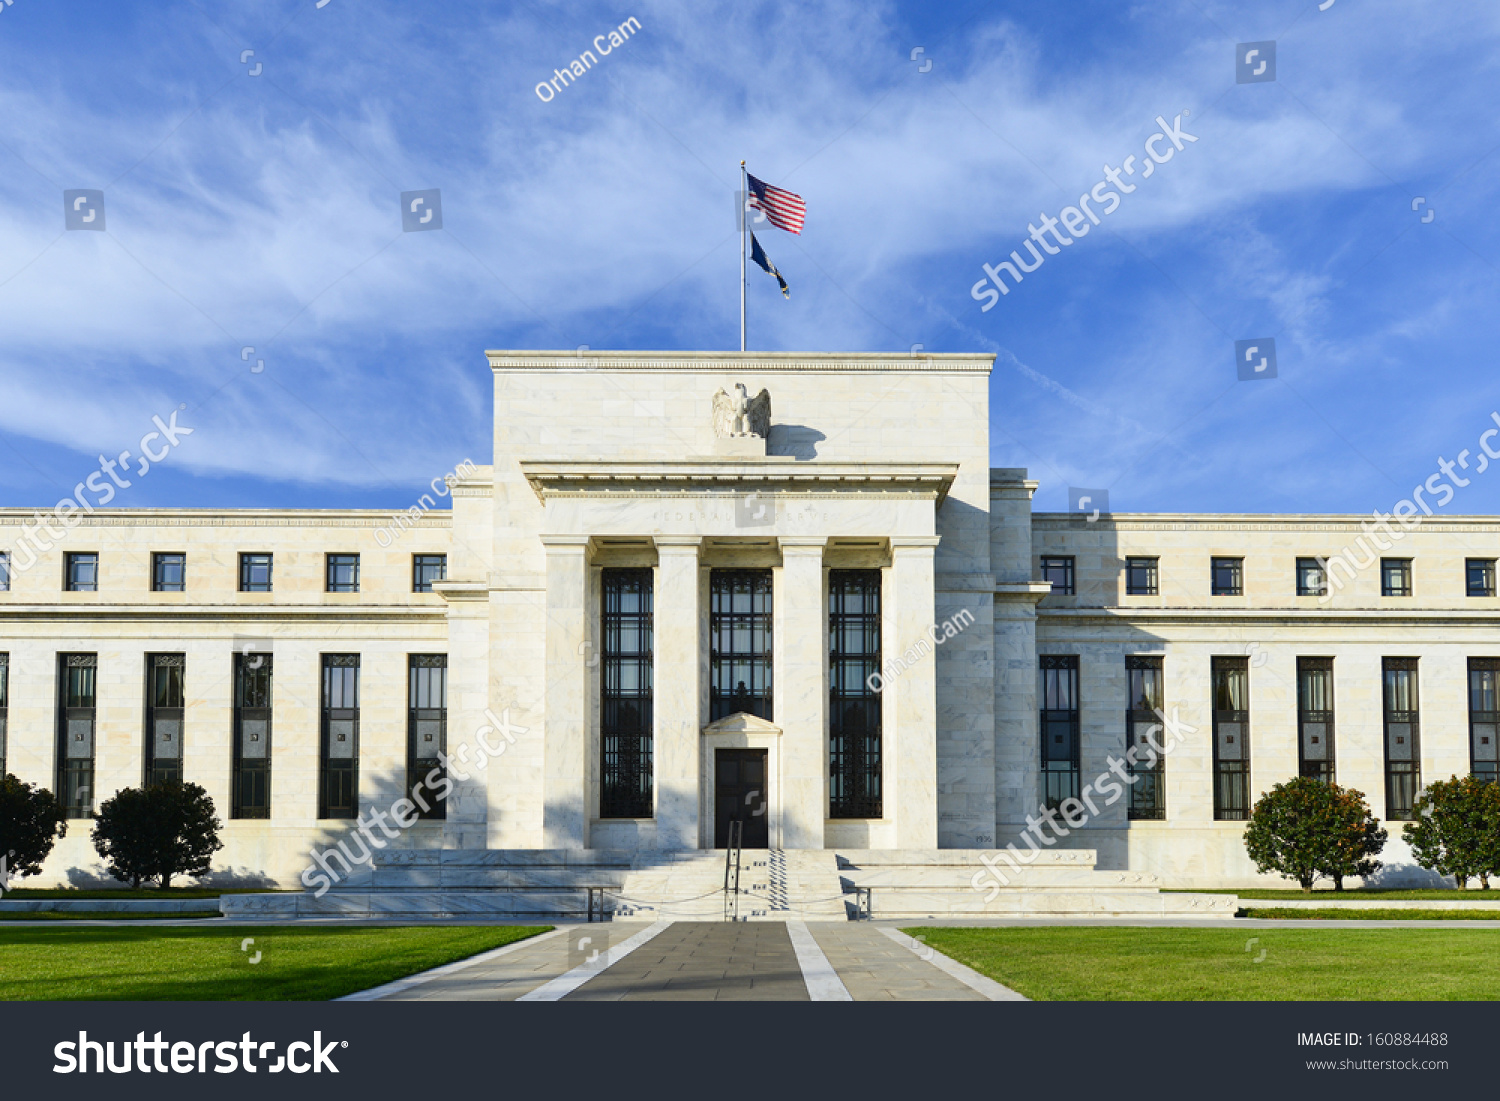 Federal Reserve Building in Washington DC, United States #160884488